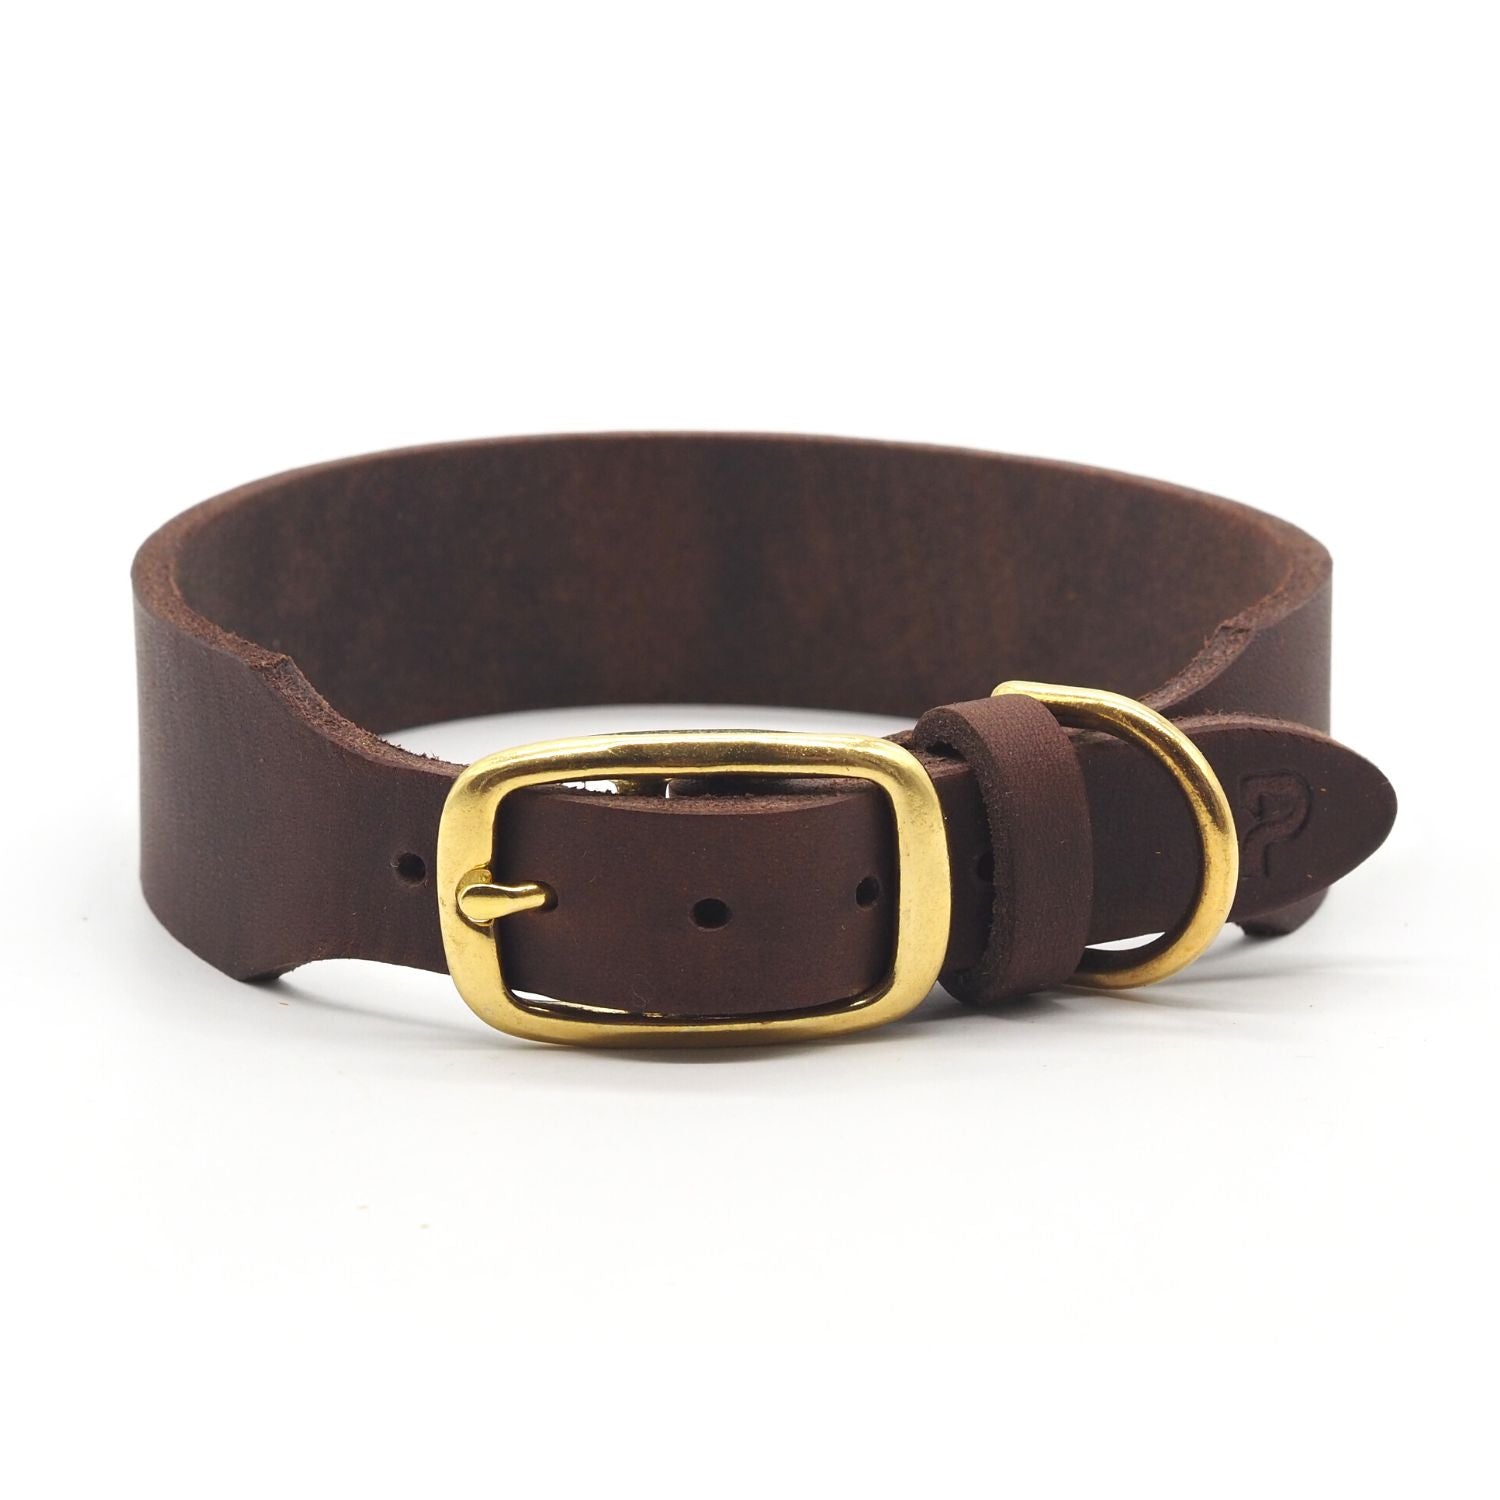 Personalizable collar with name | chestnut